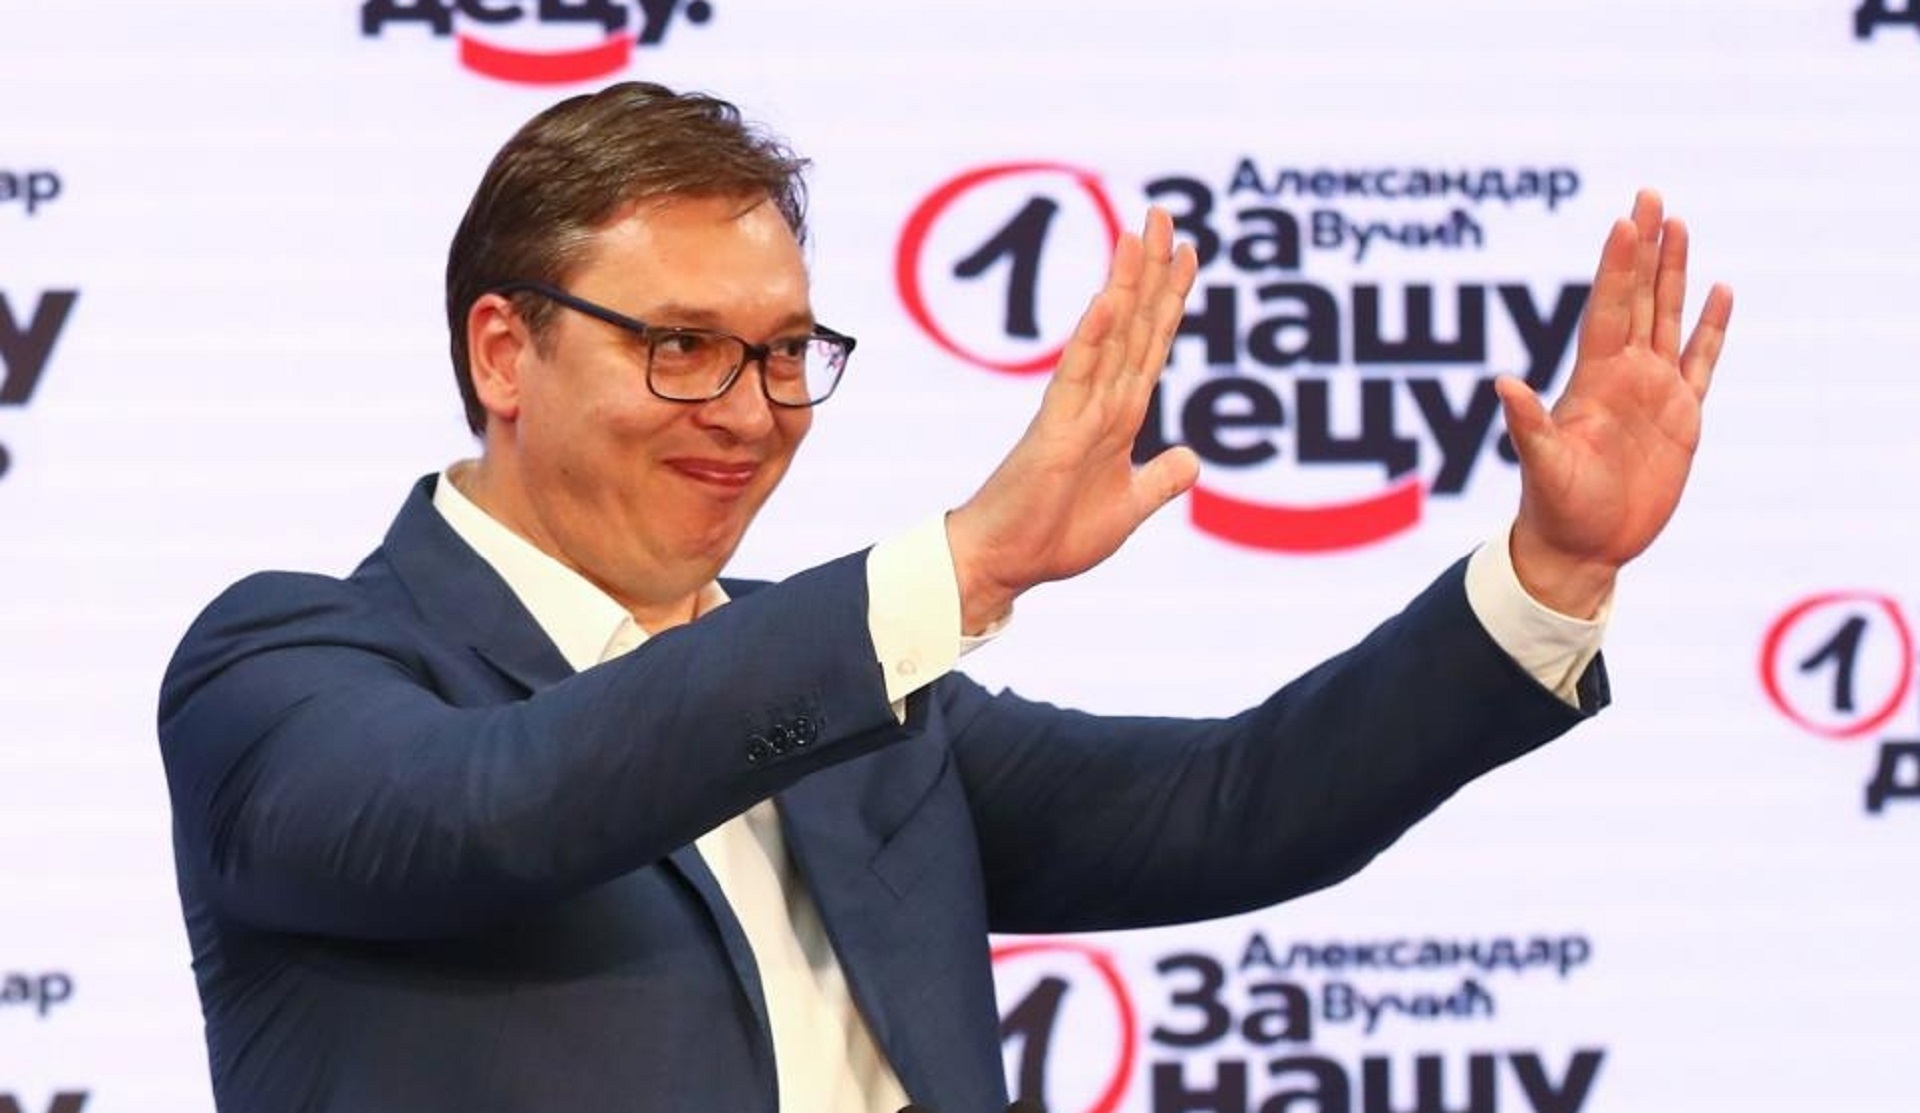 Serbia's general election Serbian President Aleksandar Vucic gestures at Serbian Progressive Party (SNS) headquarters during a national election, the first in Europe since lockdown due to the coronavirus disease (COVID-19) outbreak, in Belgrade, Serbia, June 21, 2020. REUTERS/Marko Djurica MARKO DJURICA